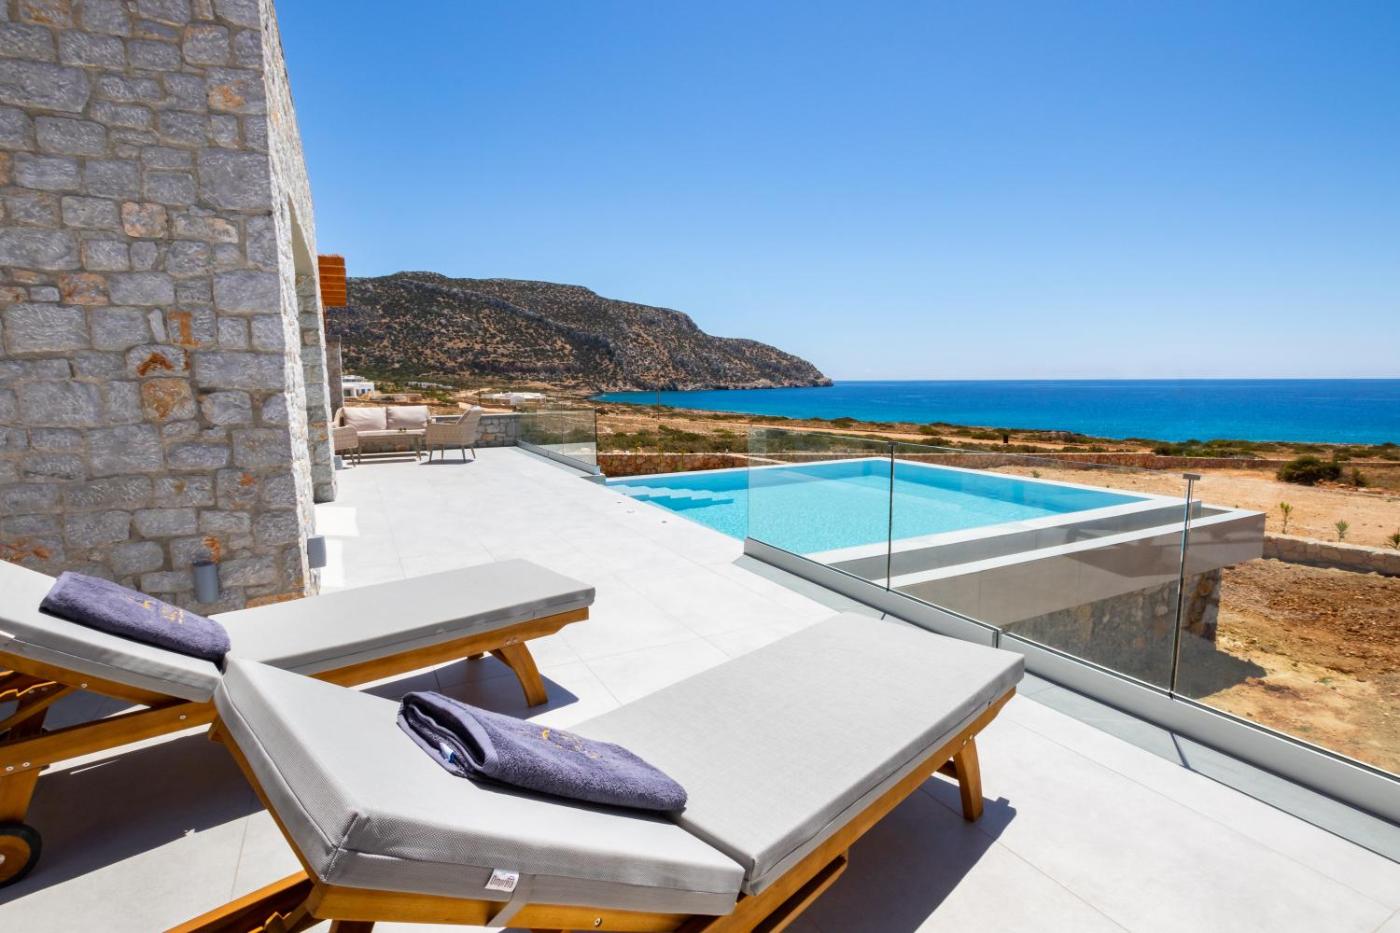 Hotel with private pool - Aros Luxury Villas